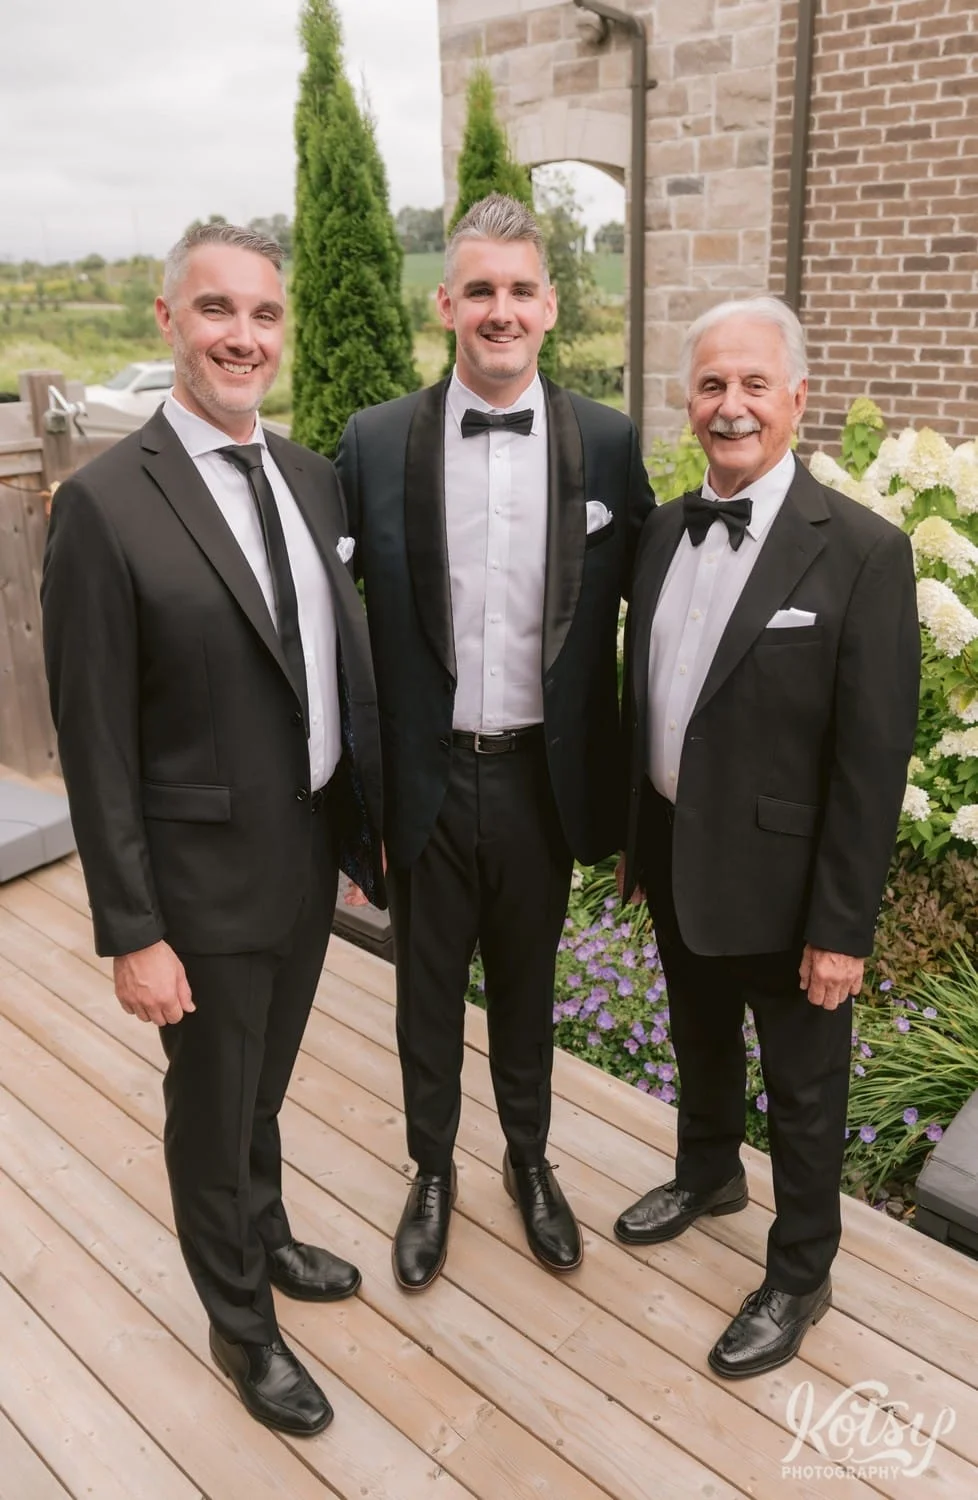 Three men in black suits pose for a group photo on a back patio